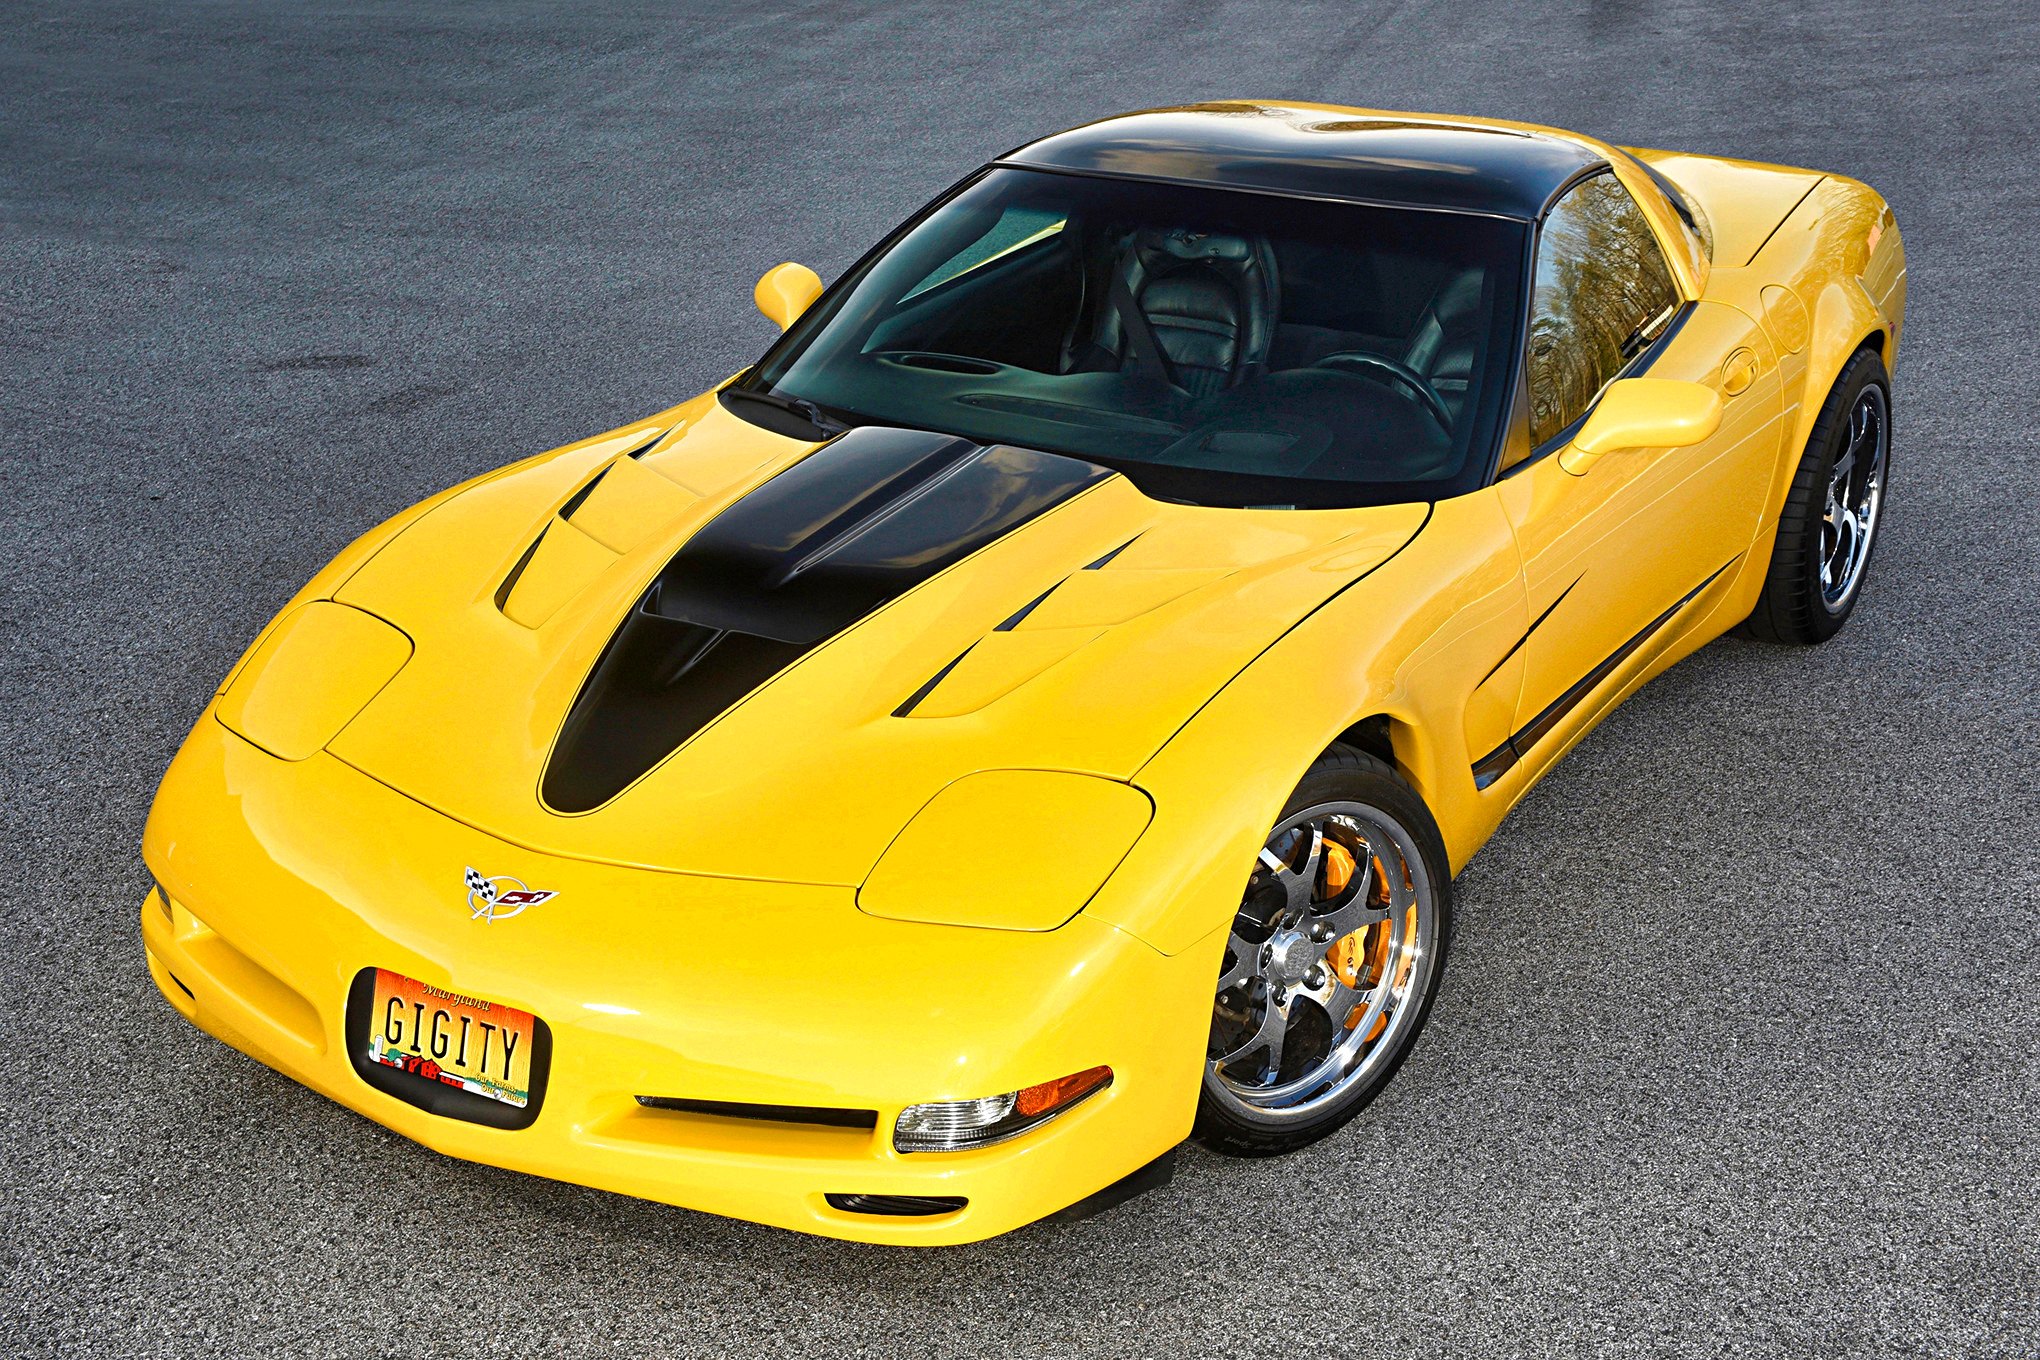 Chrome Wheels with Brembo Brakes on Yellow Chevy Corvette - Photo by Scotty Lachenauer